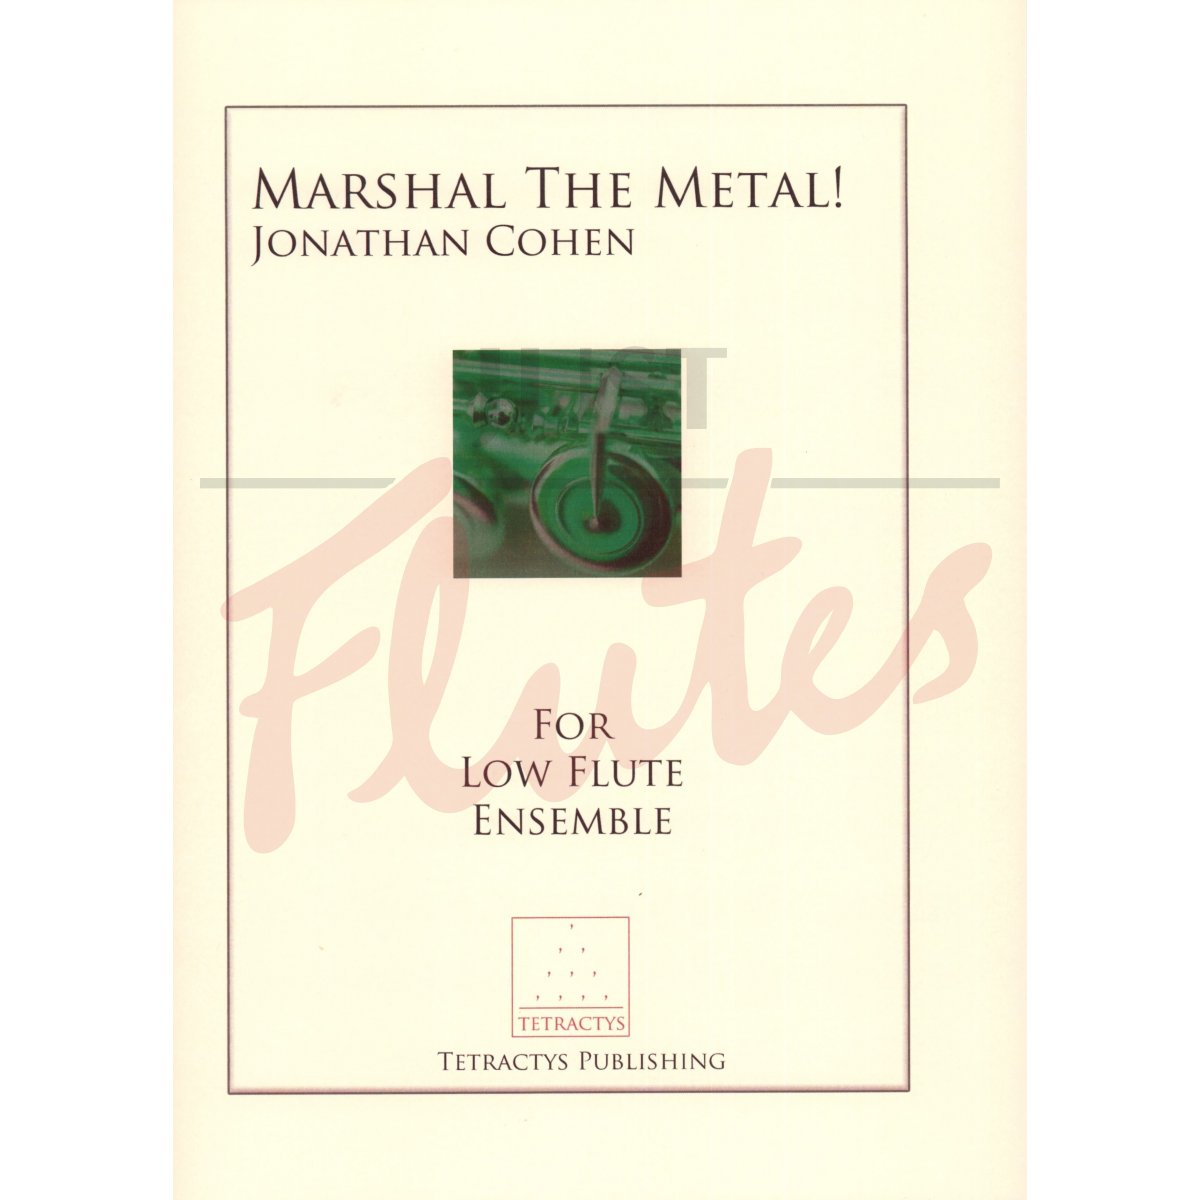 Marshal the Metal! for Low Flute Ensemble